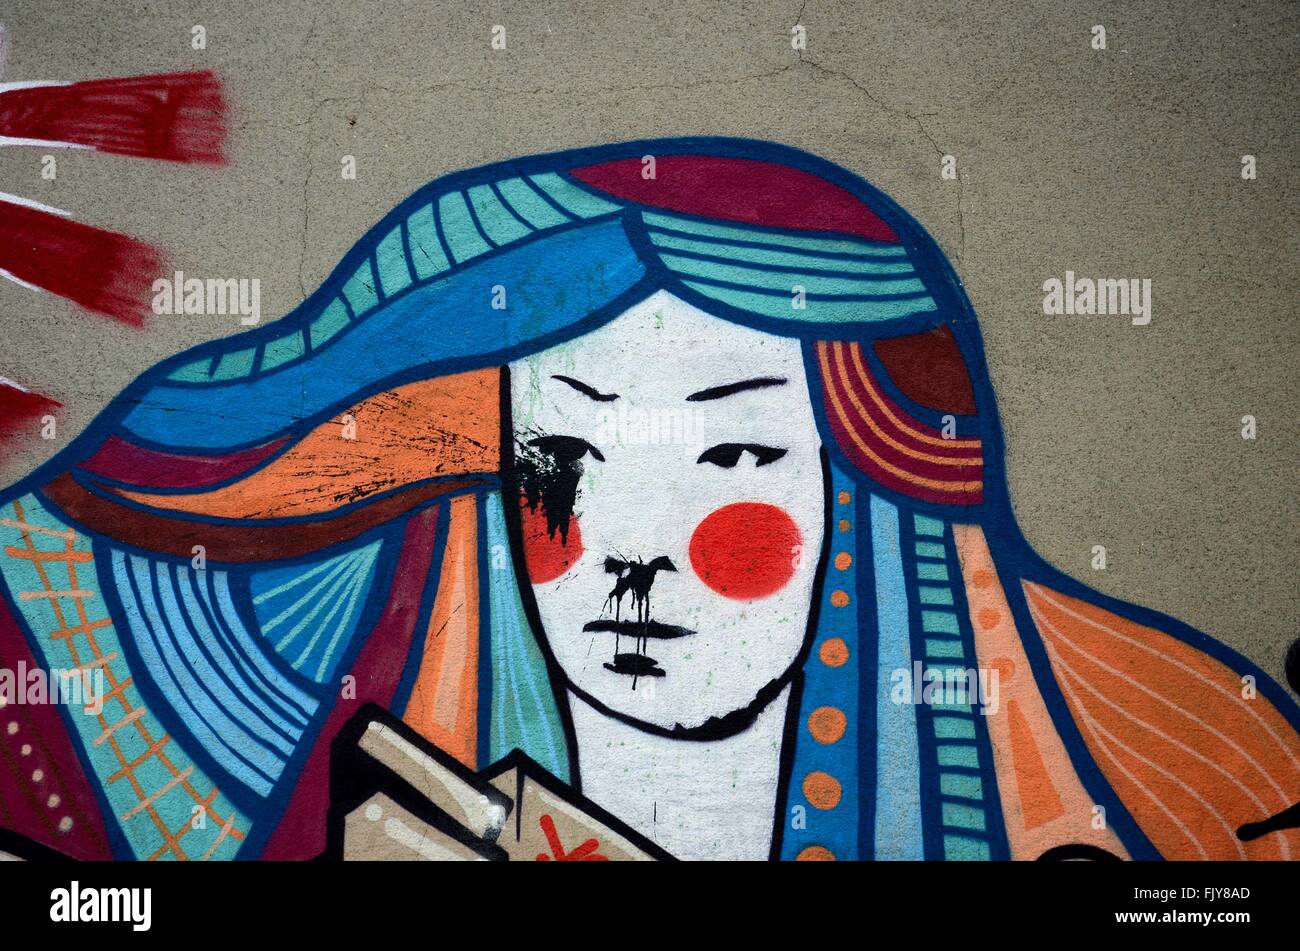 Japanese Graffiti High Resolution Stock Photography And Images Alamy